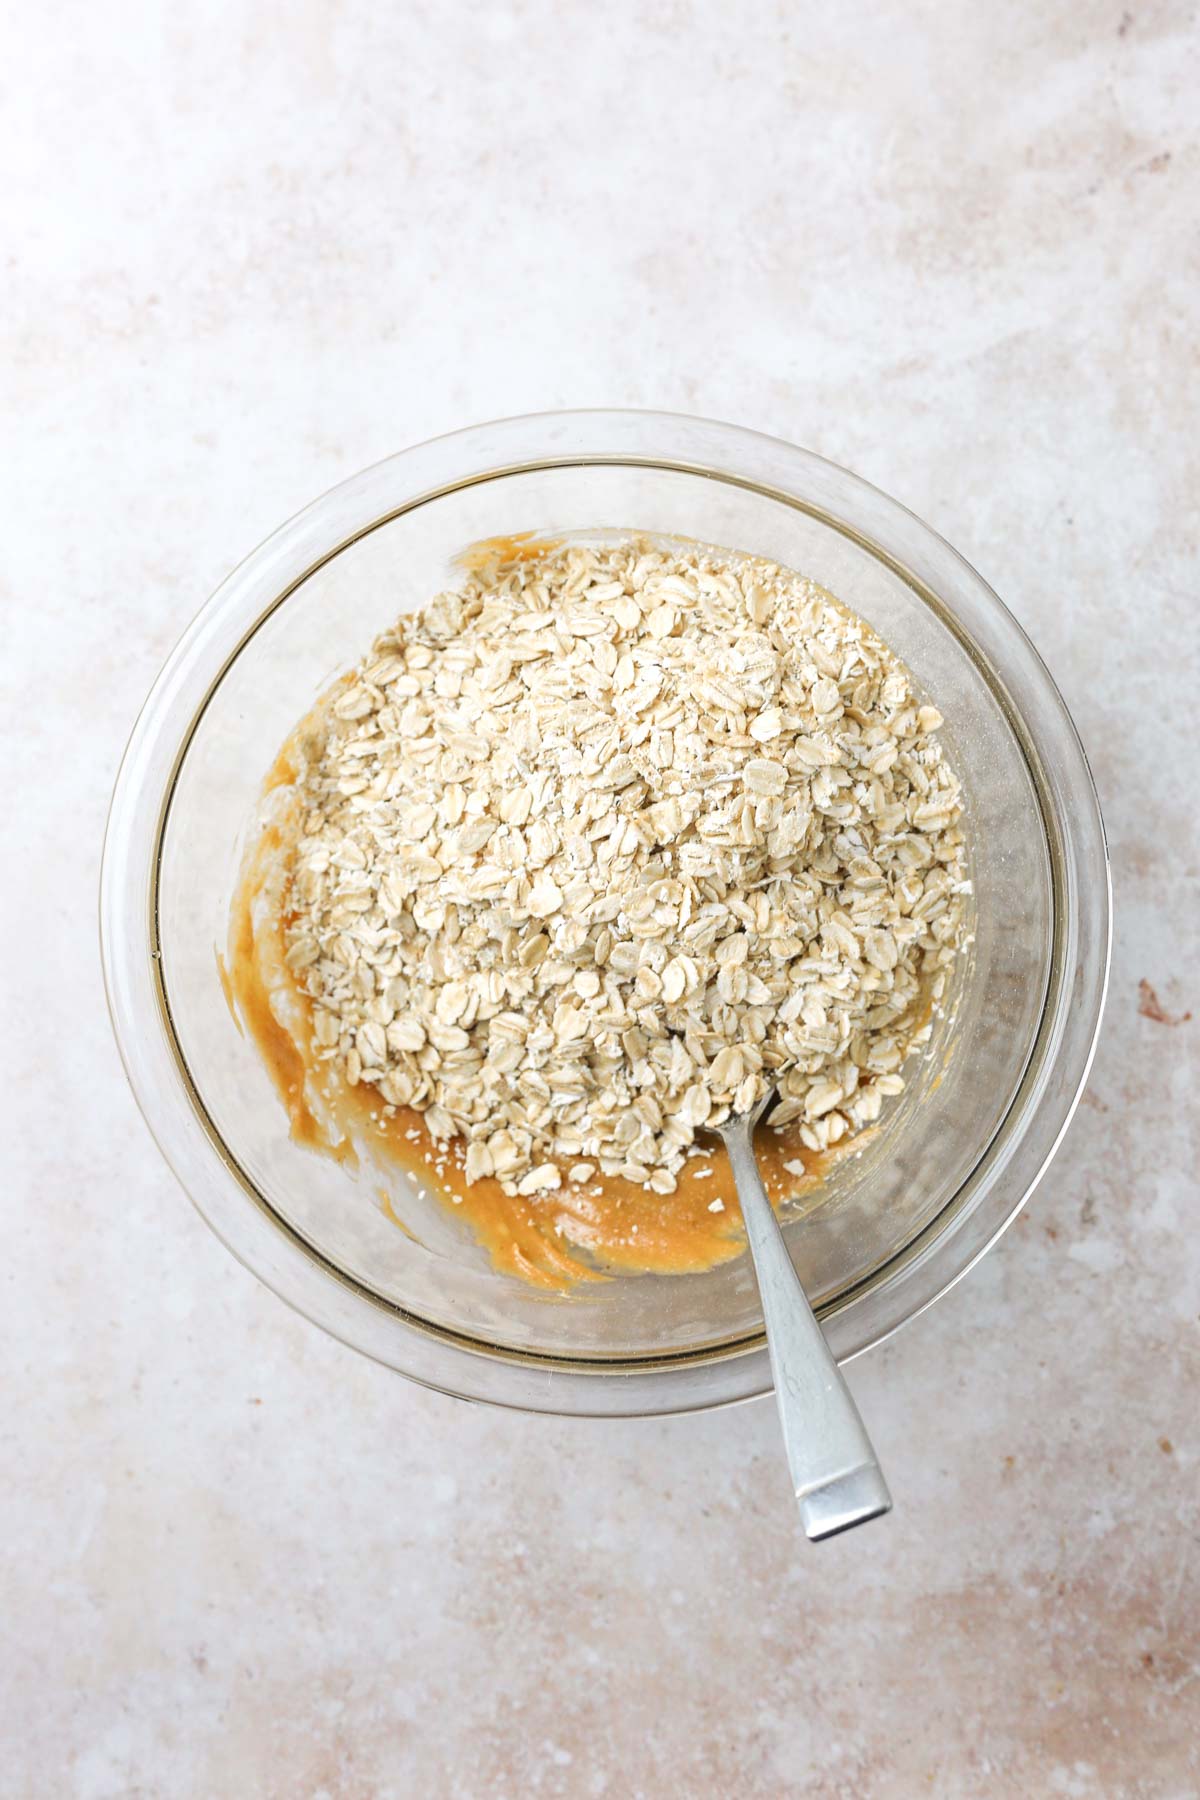 adding the old-fashioned oats to the bowl with the peanut butter and maple syrup.